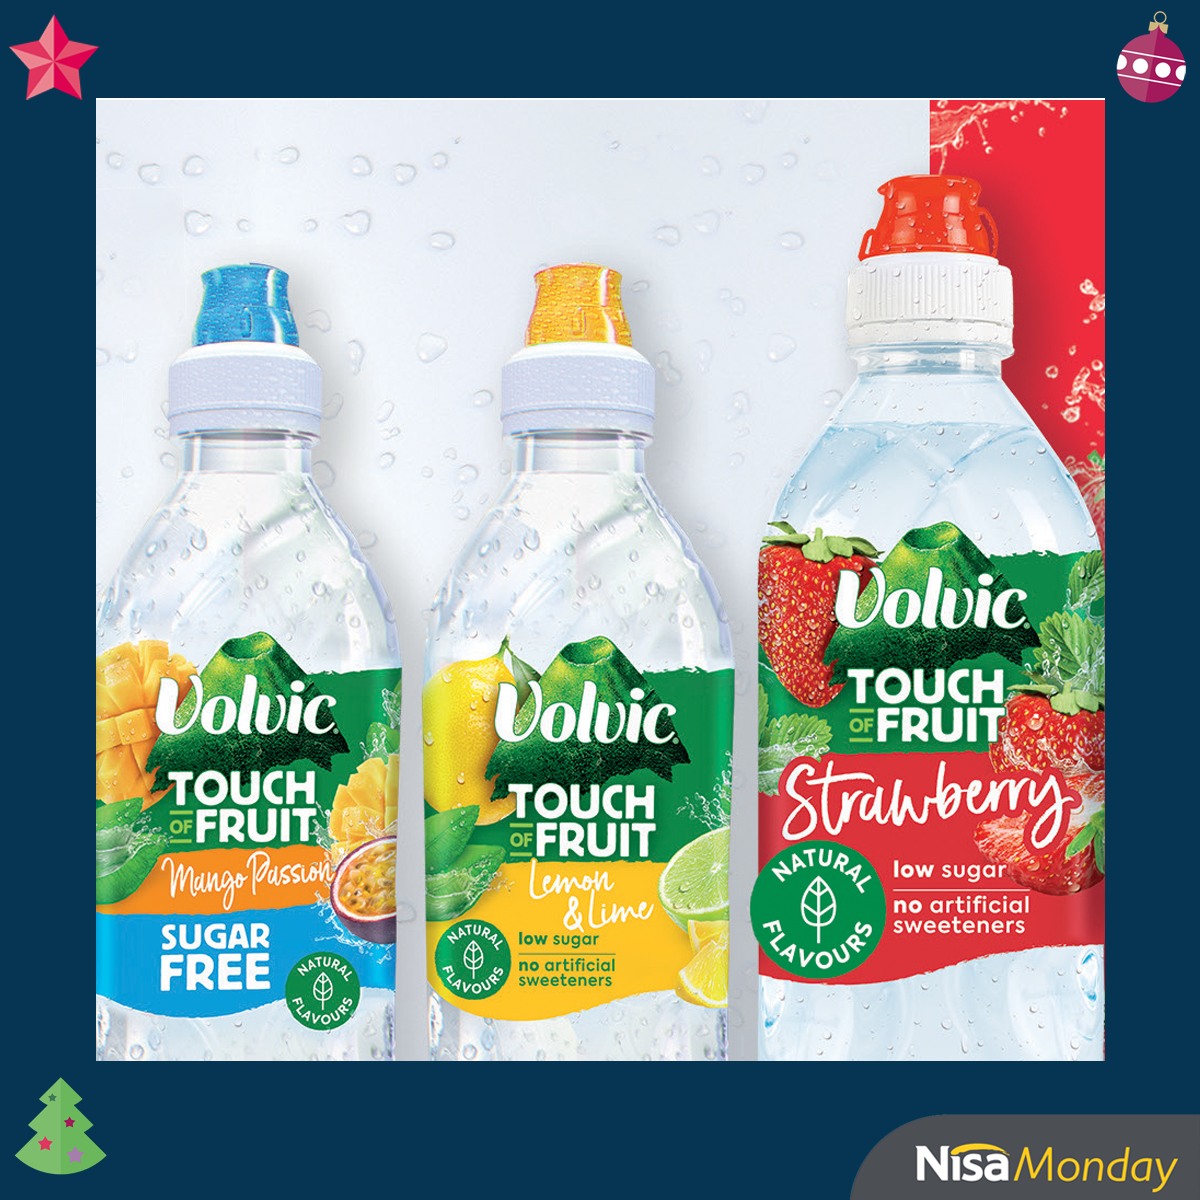 WIN a £50 One4All Voucher with Volvic Touch of Fruit and #NisaMonday!
For your chance to win a £50 One4All Voucher, simply LIKE this post and comment who you would share a #Volvic water with!
Closes: 17.12.23
T&C's: spr.ly/6183R3w2t #nisalocal #NisaLocally #uk